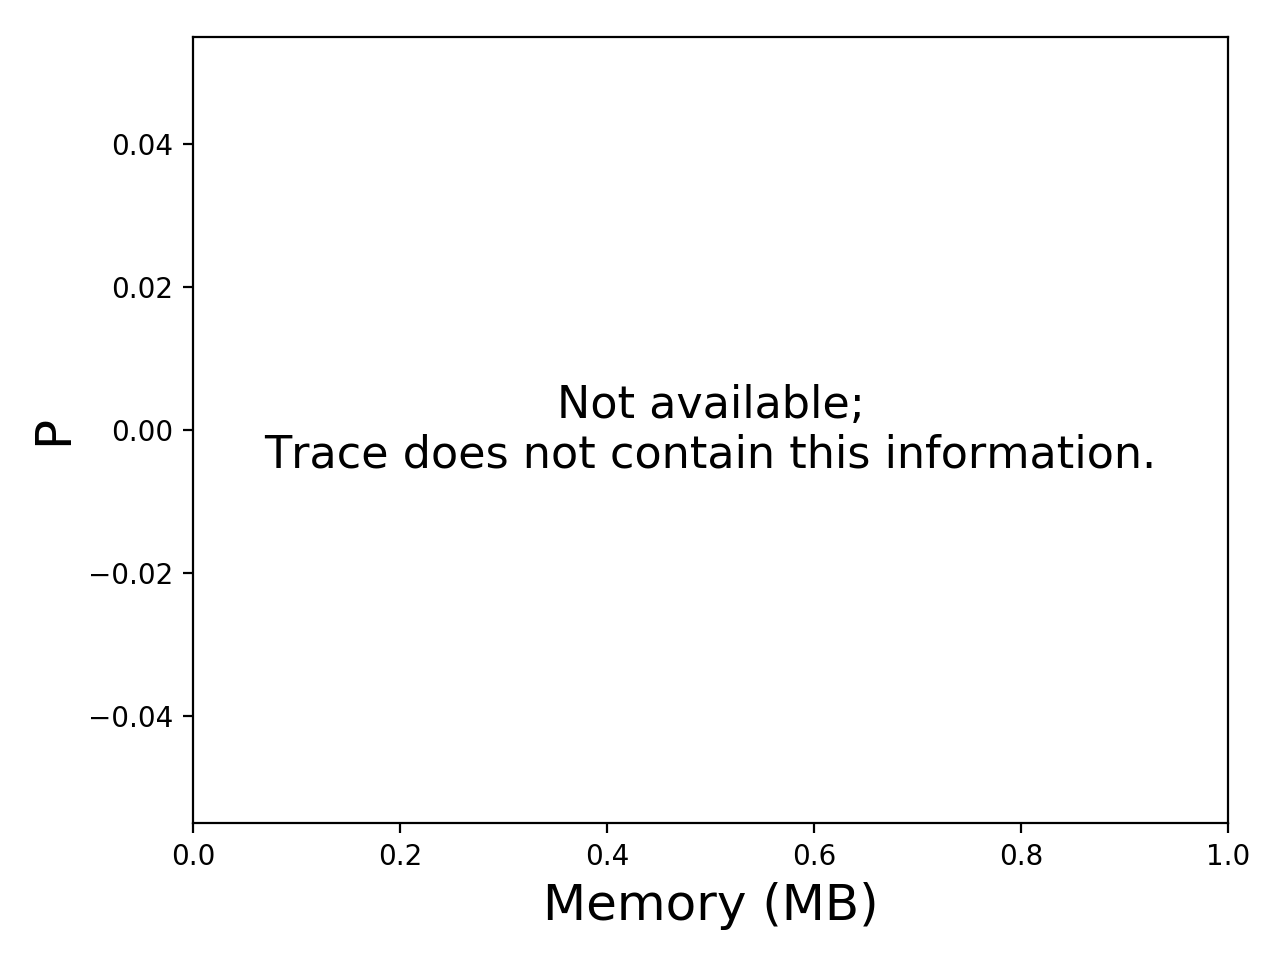 Task memory consumption graph for the Pegasus_P3 trace.